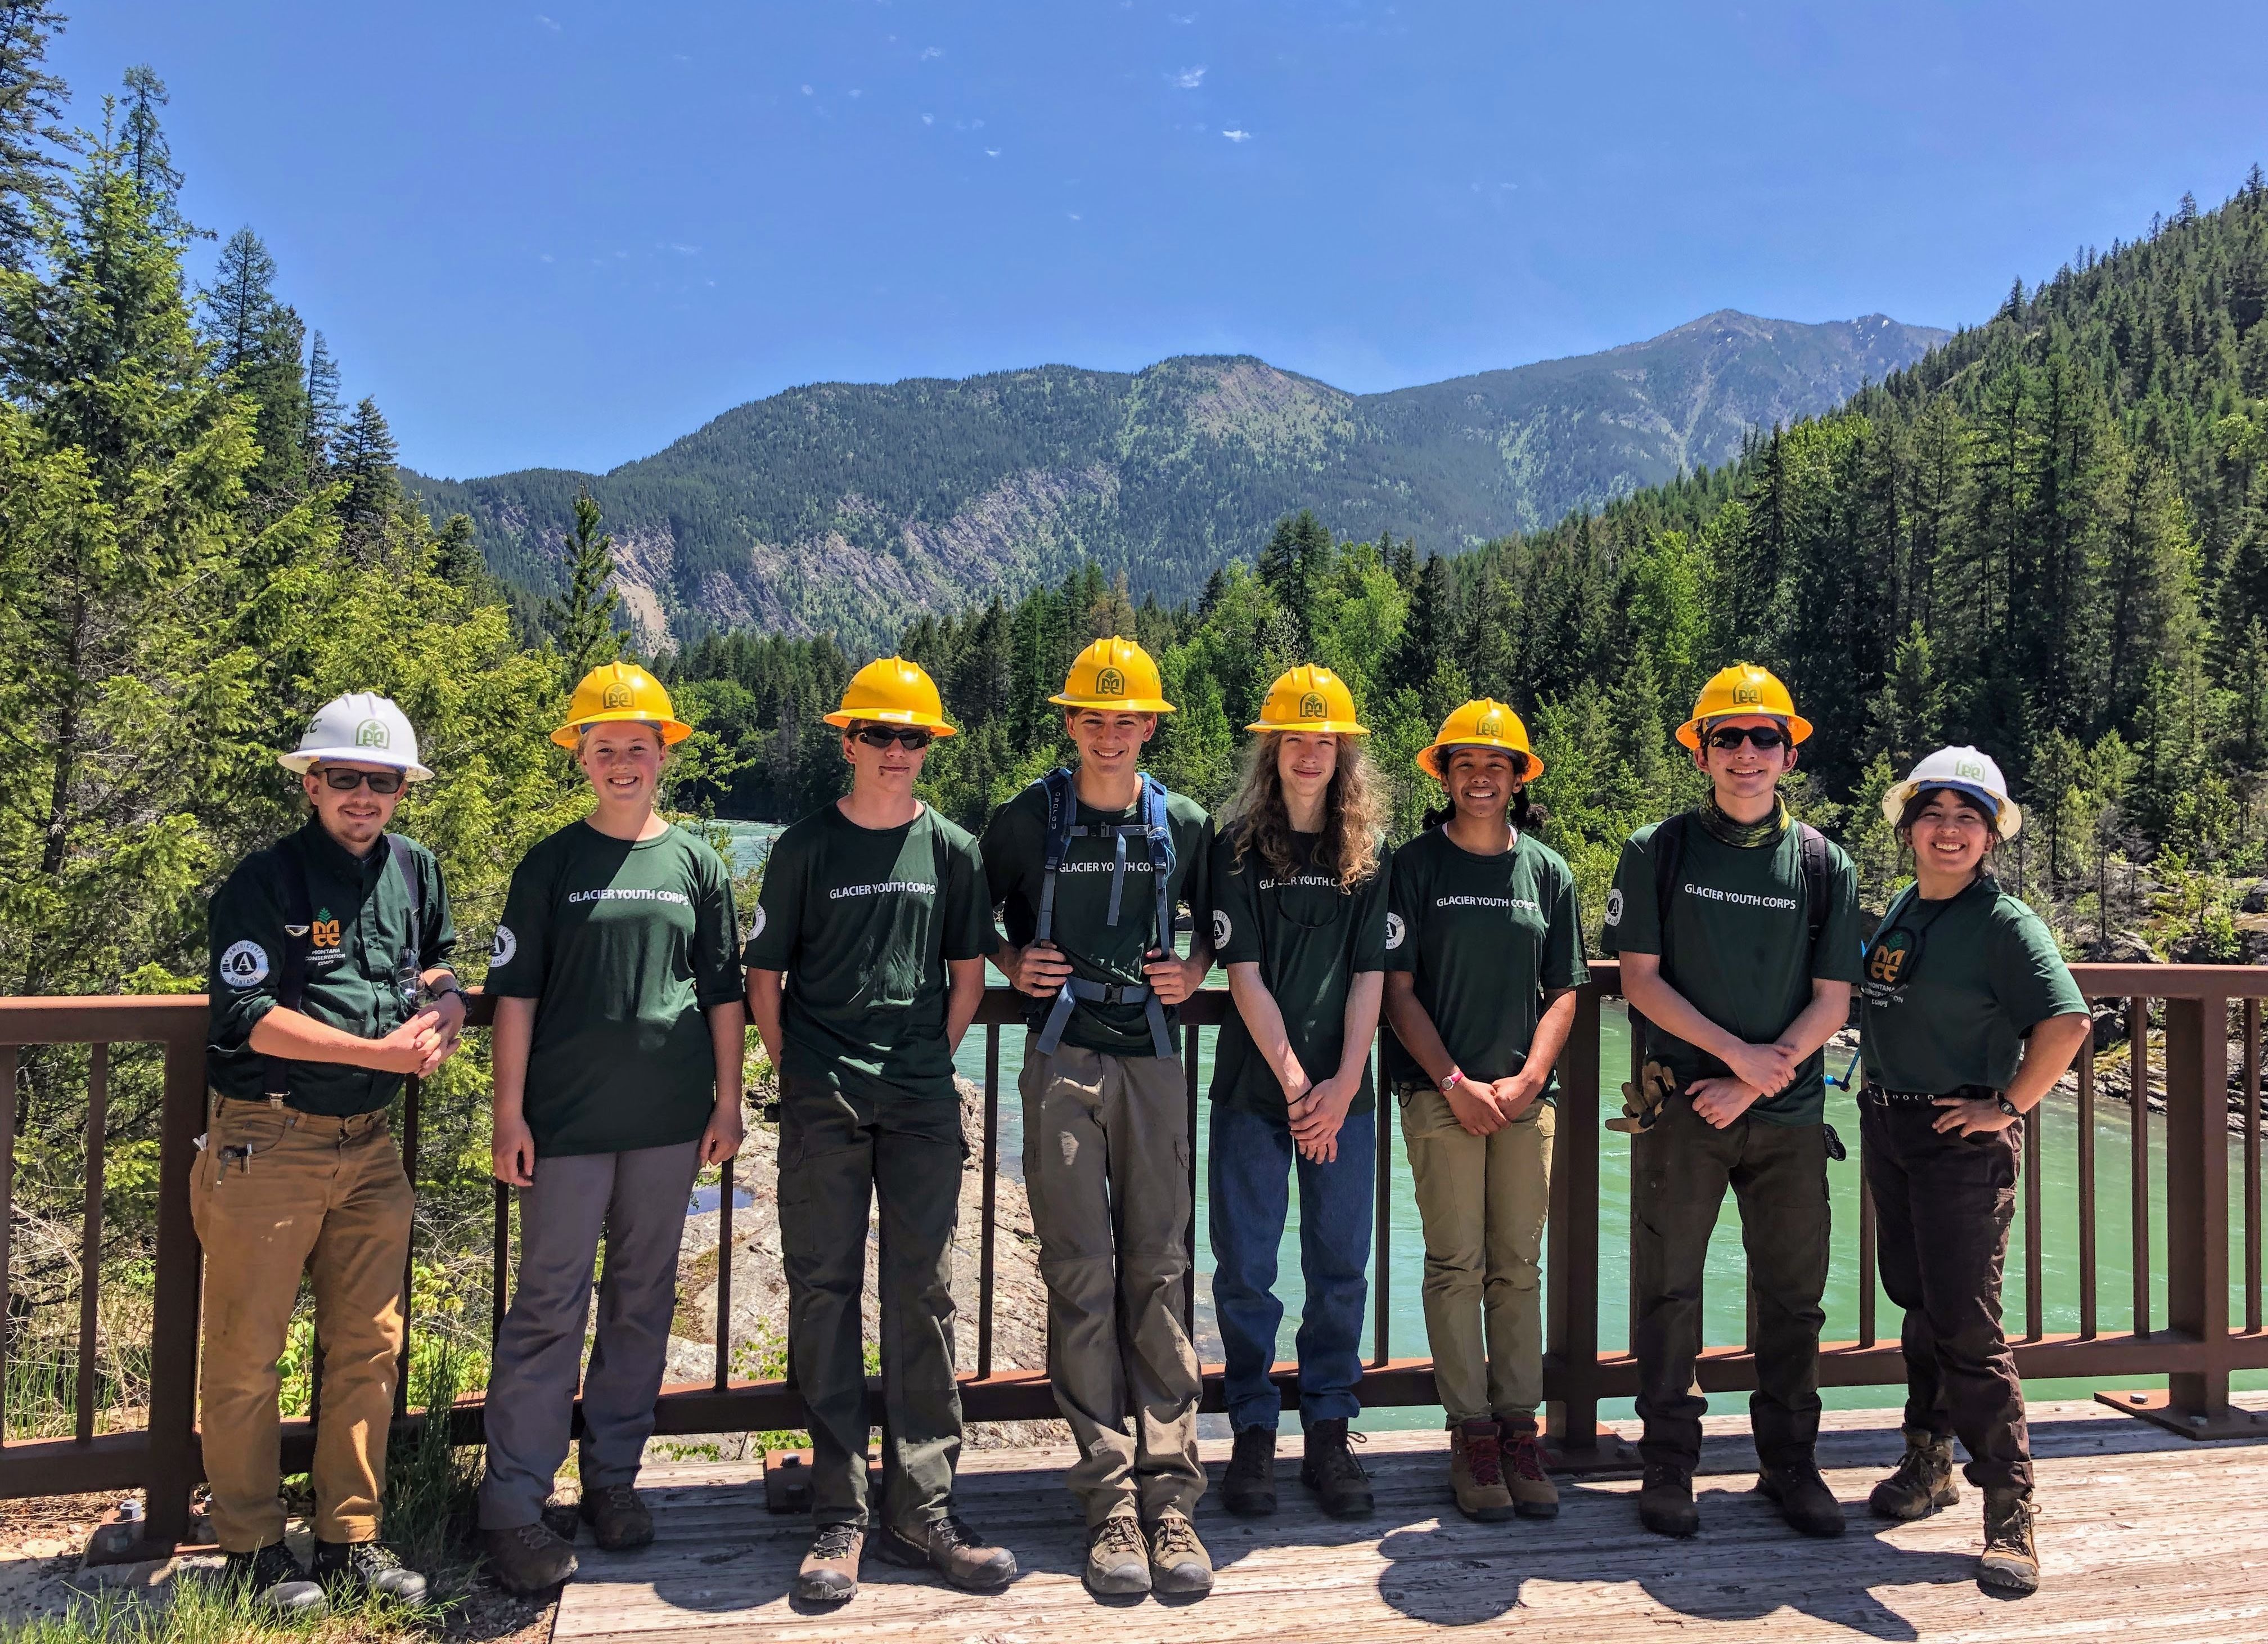 [Image Description: Six Youth MCC members and their two leaders are standing together on a bridge. In the background, dark green trees cover the mountains and the water below them is a bright, turquoise color.]